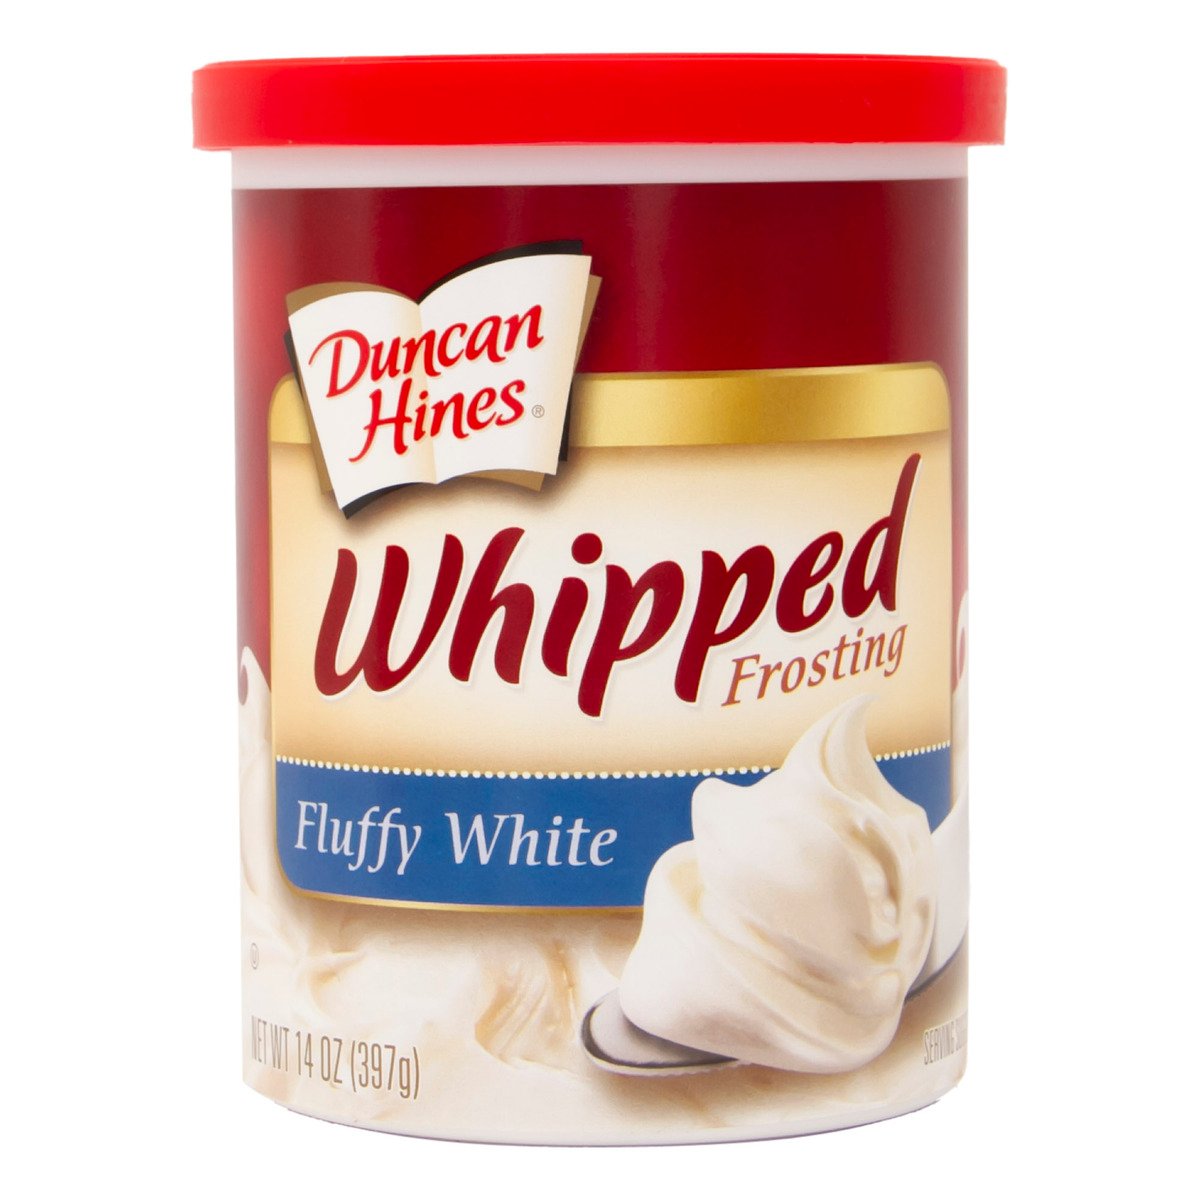 Duncan Hines Whipped Frosting Fluffy White 397 g